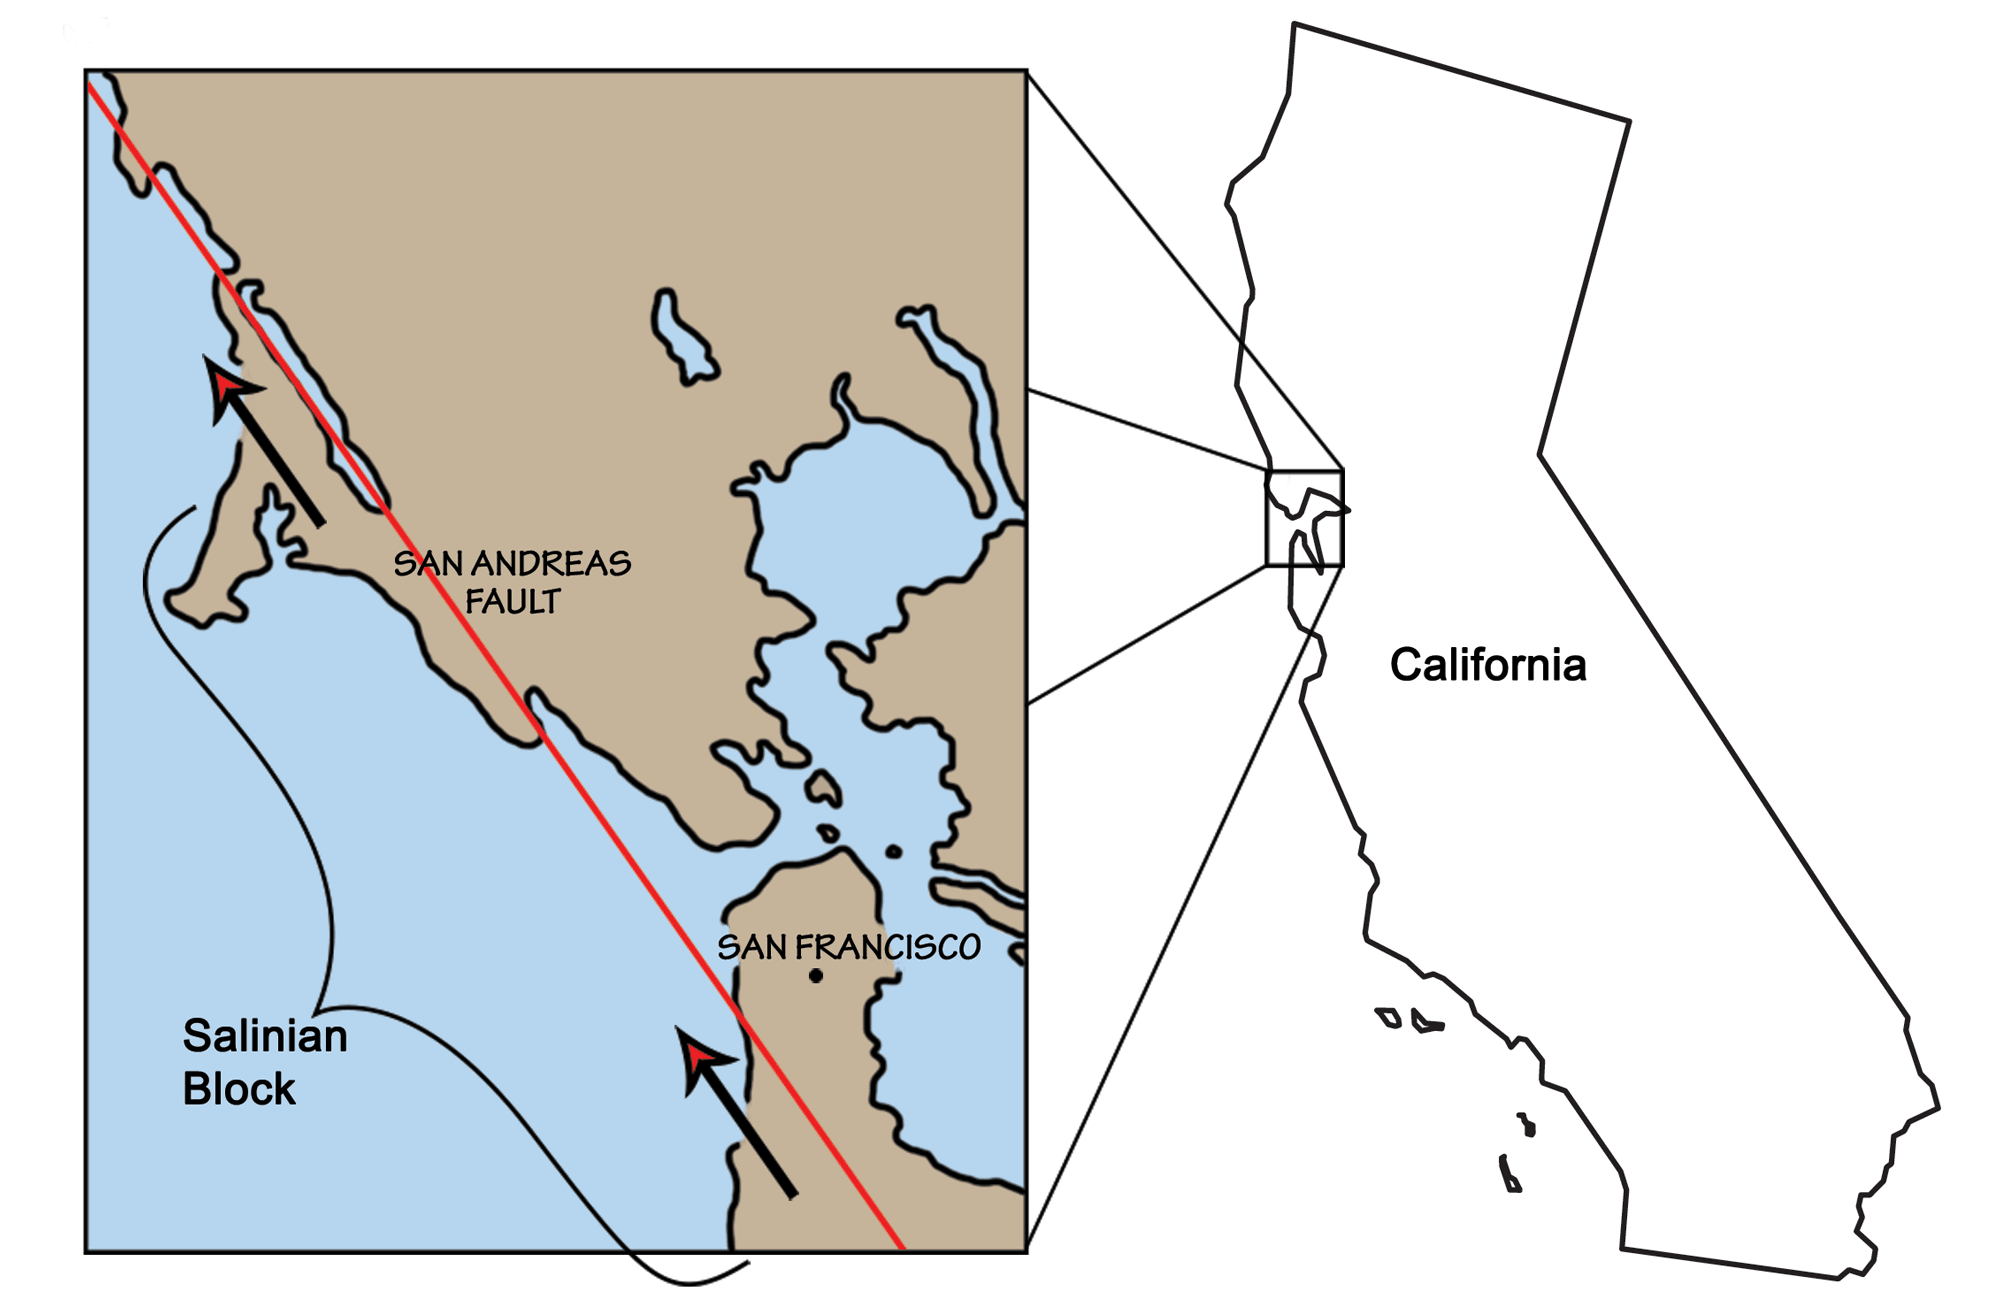 Map showing the location of the Salinian Block in the Bay Area of California.